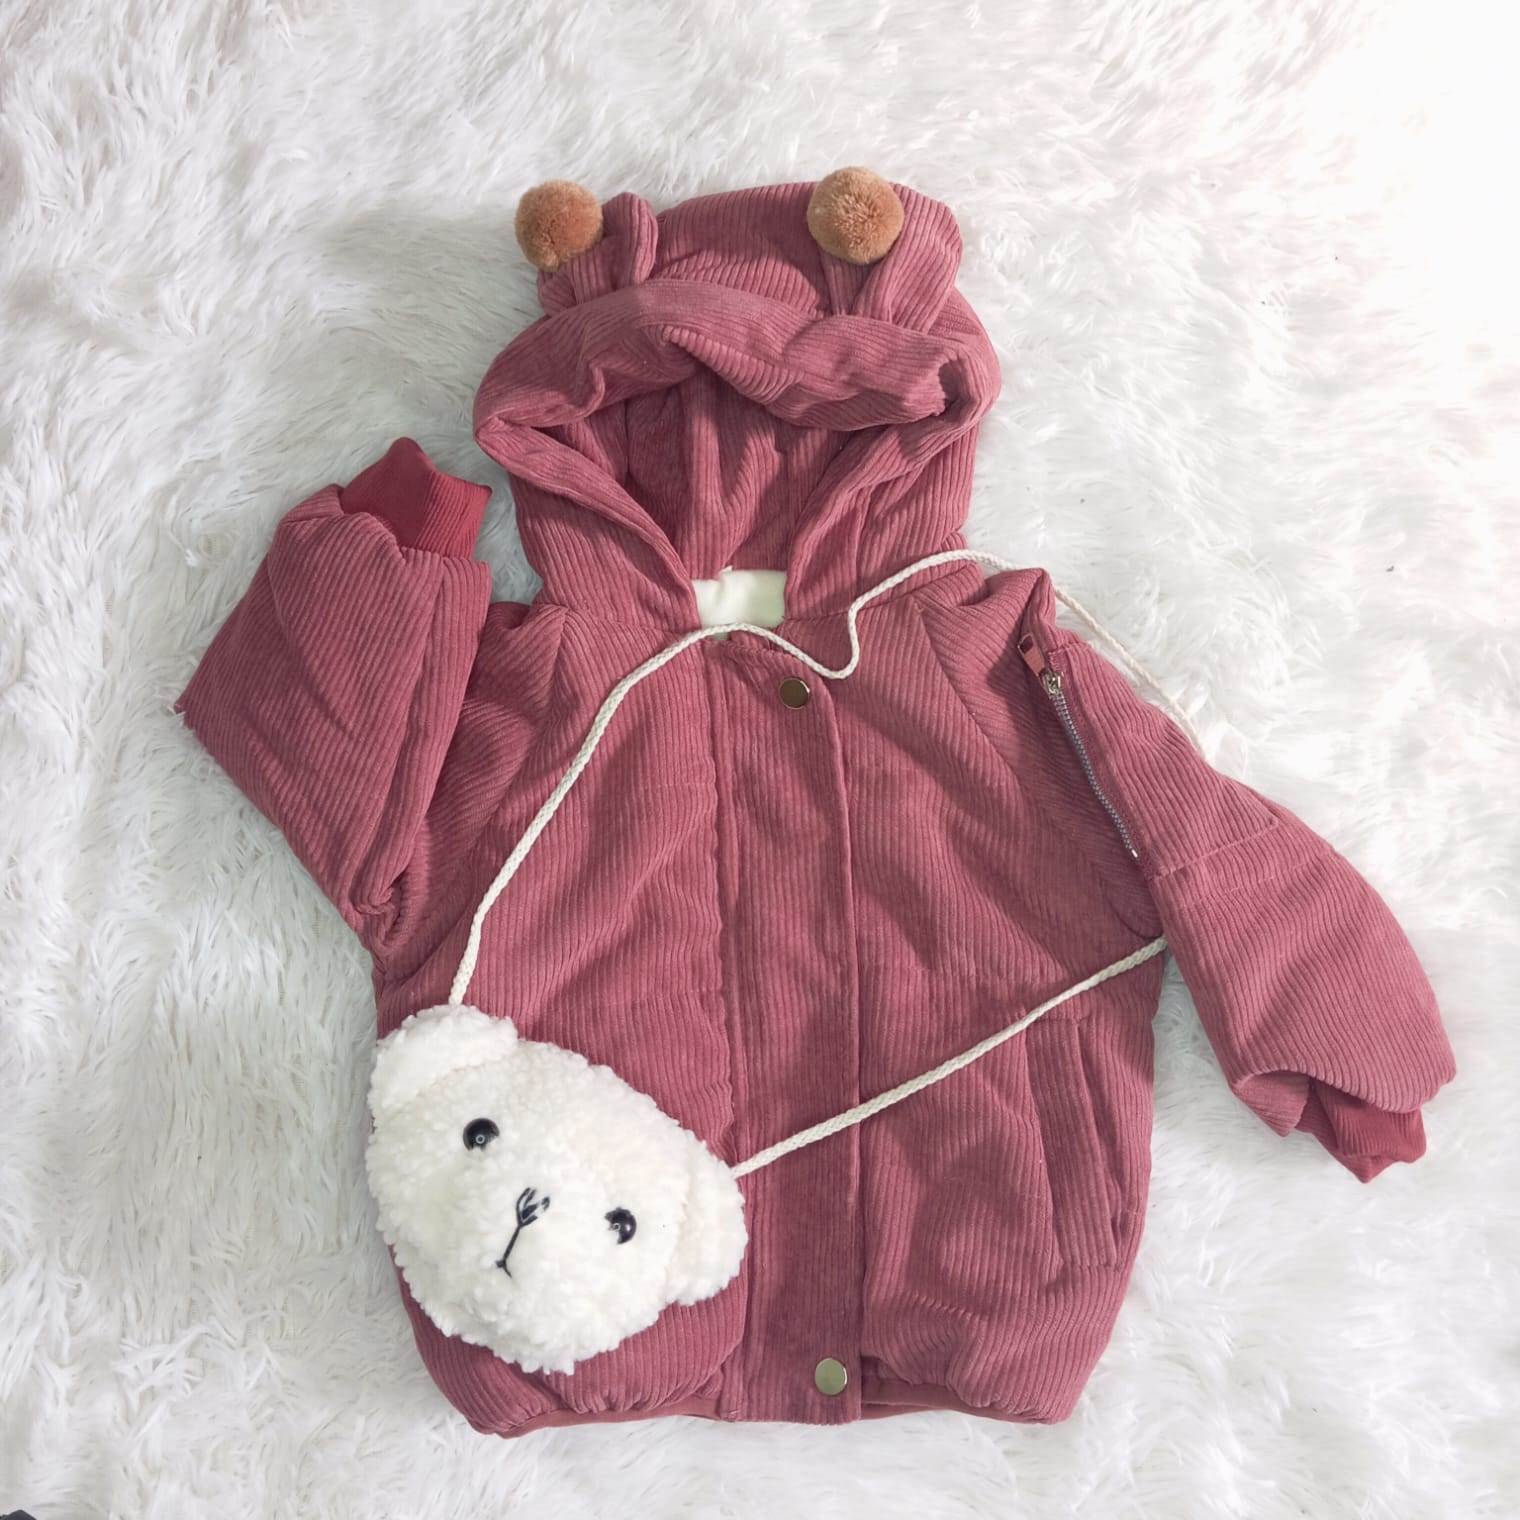 Hooded Cotton Jacket For Babies Suitable For Winter, Autumn & Spring Season